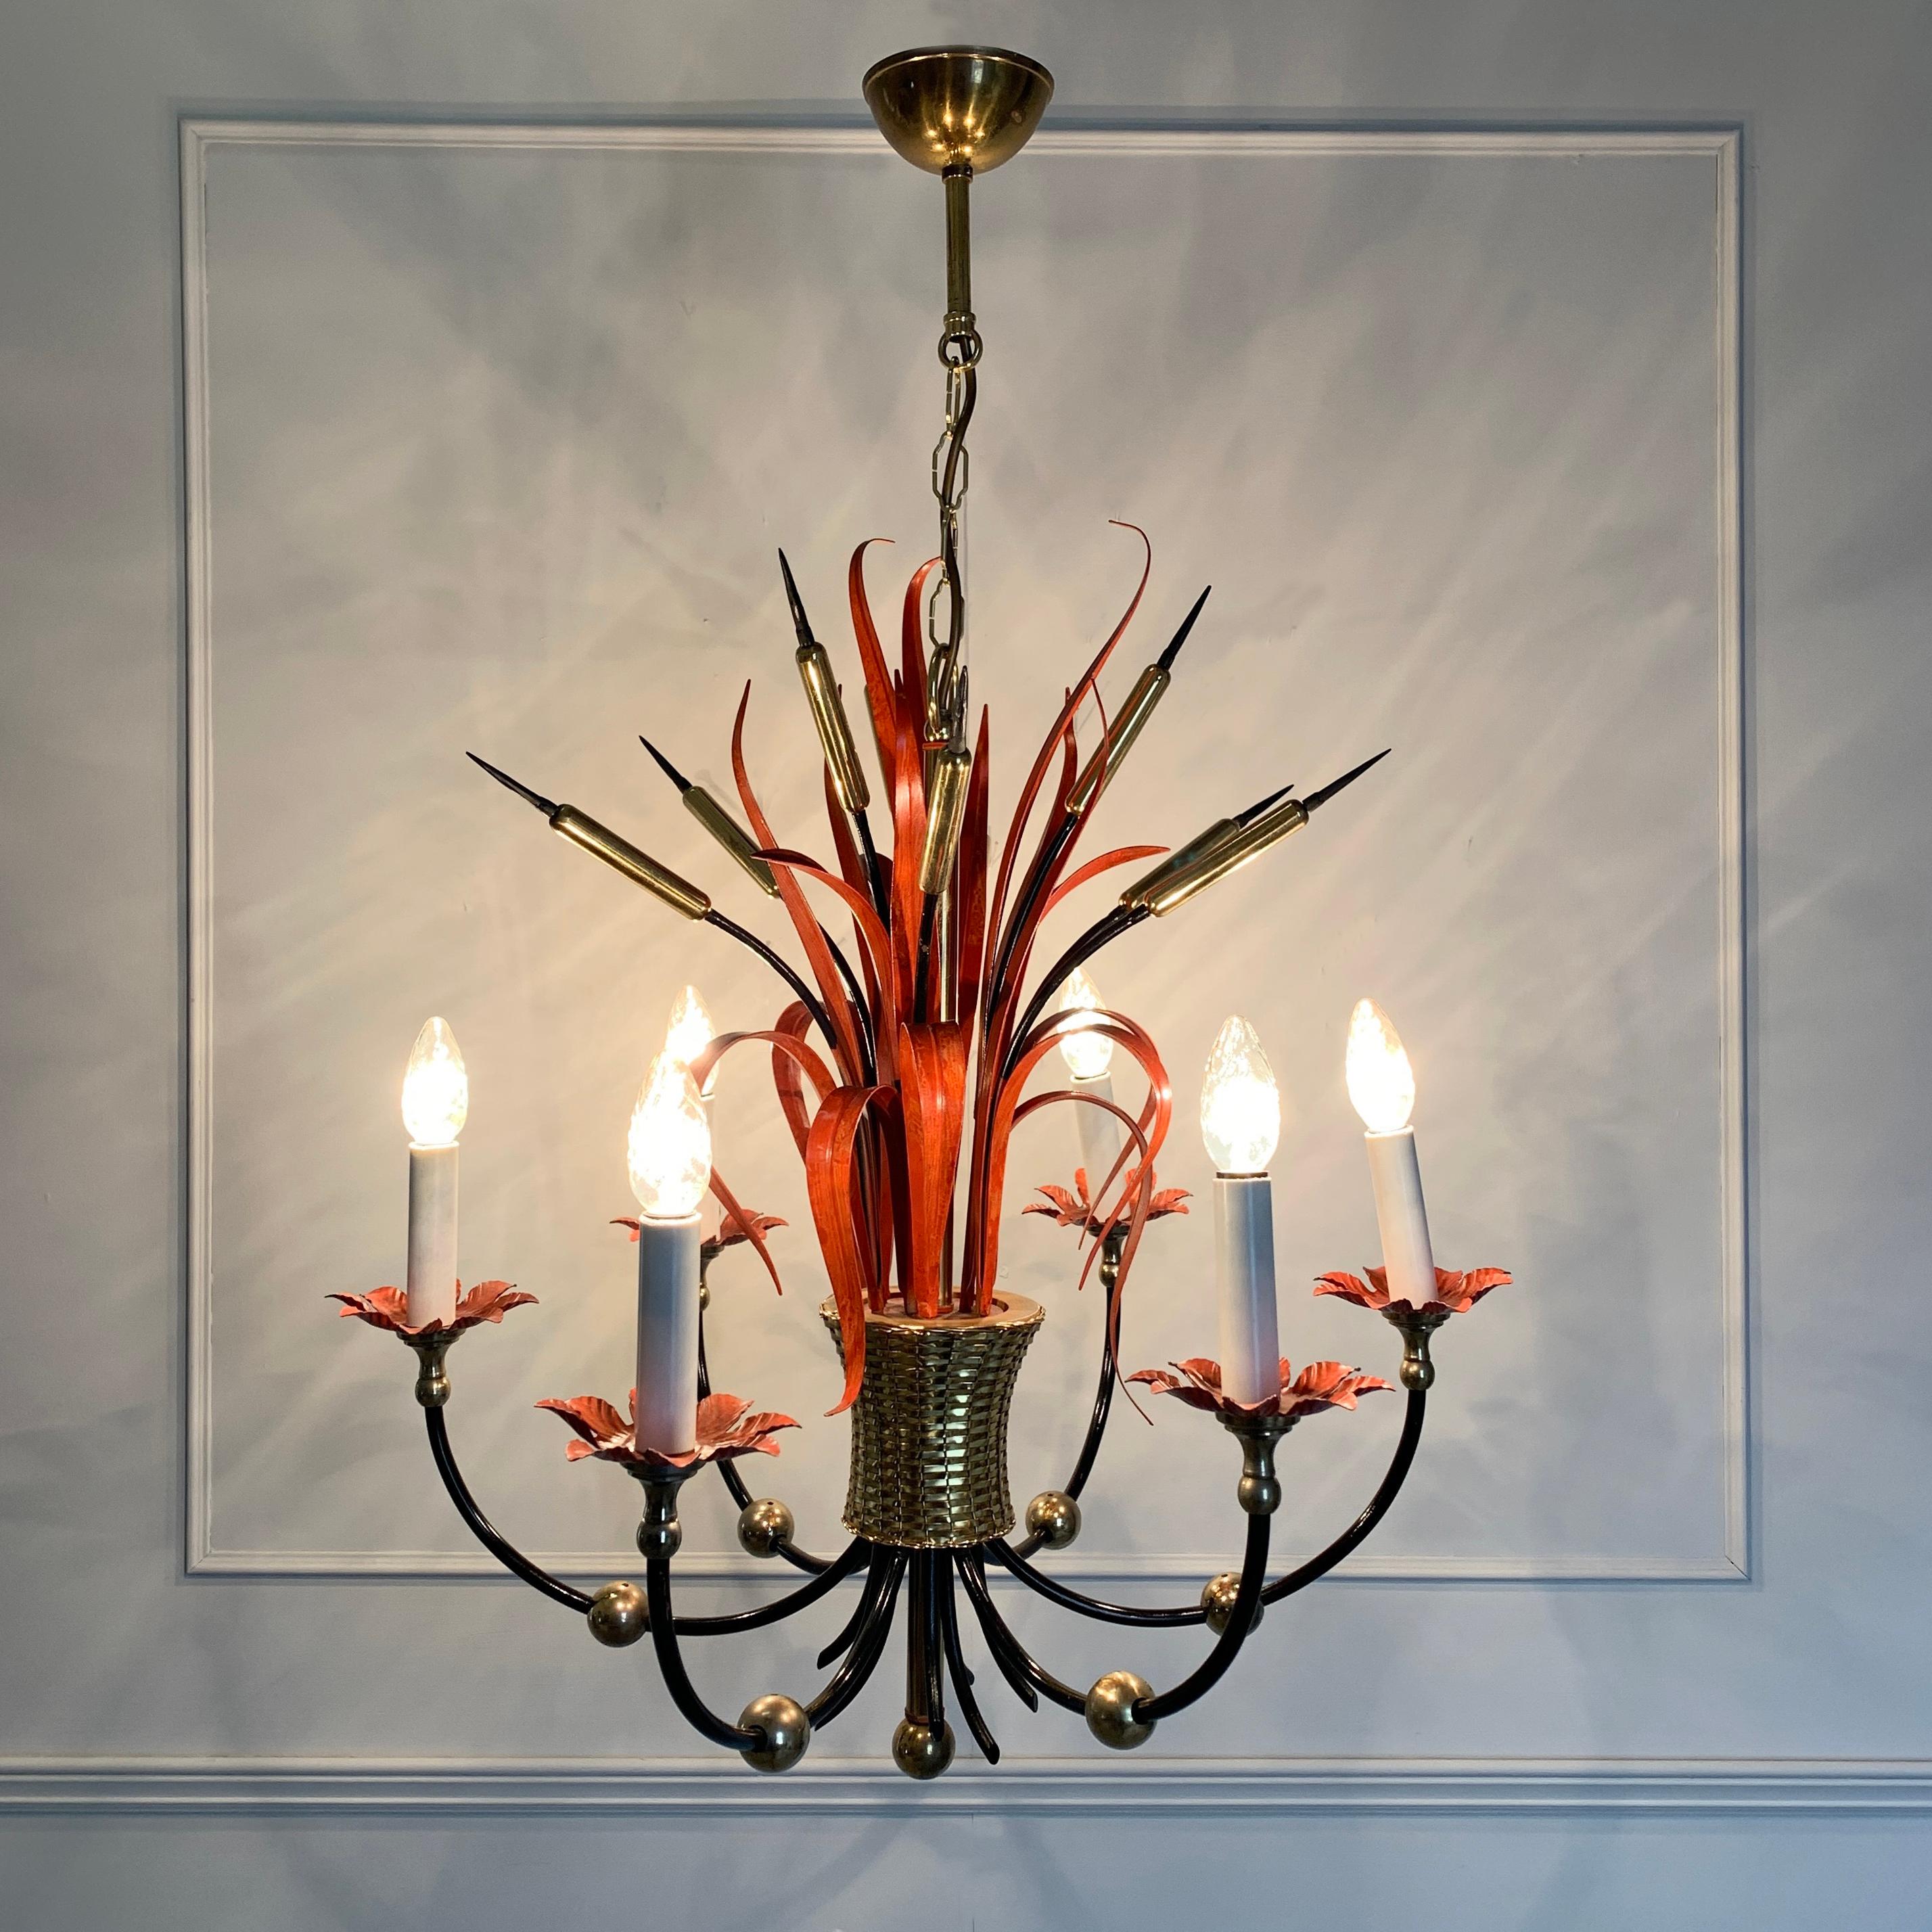 Maison Bagues attributed Bulrush chandelier
circa 1970s-1980s, France
Stunning red leaves decorate the centre of the chandelier, intertwined with gilt bulrush heads
The gold woven metal basket at the base is handcrafted
There are 6 bulb holders, e14